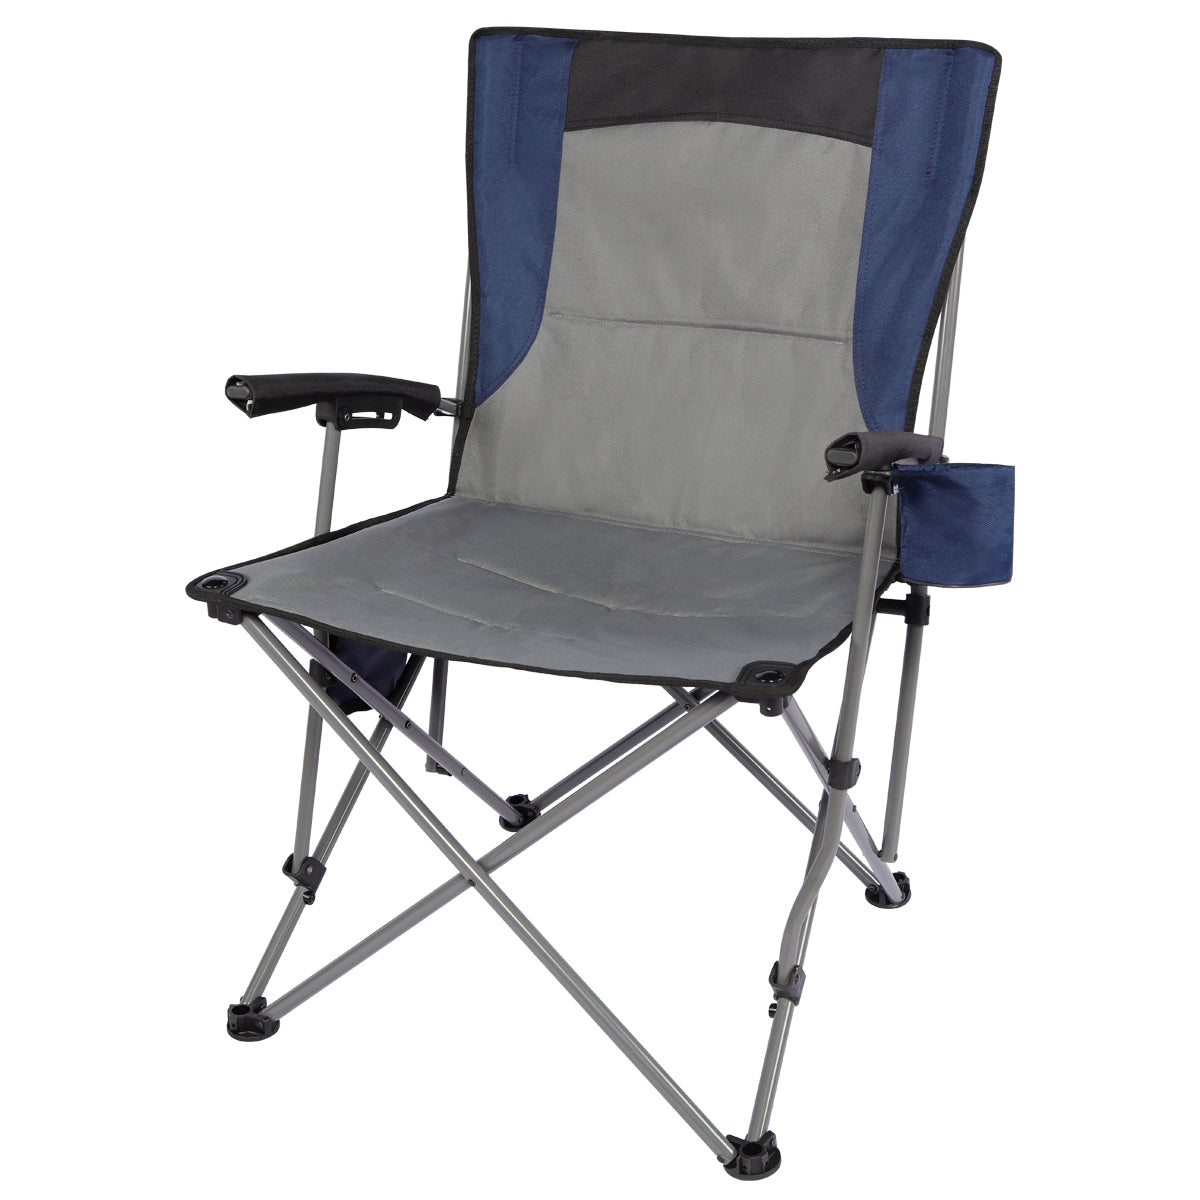 PORTAL Camping Chair Folding Portable Quad Mesh Back with Cup